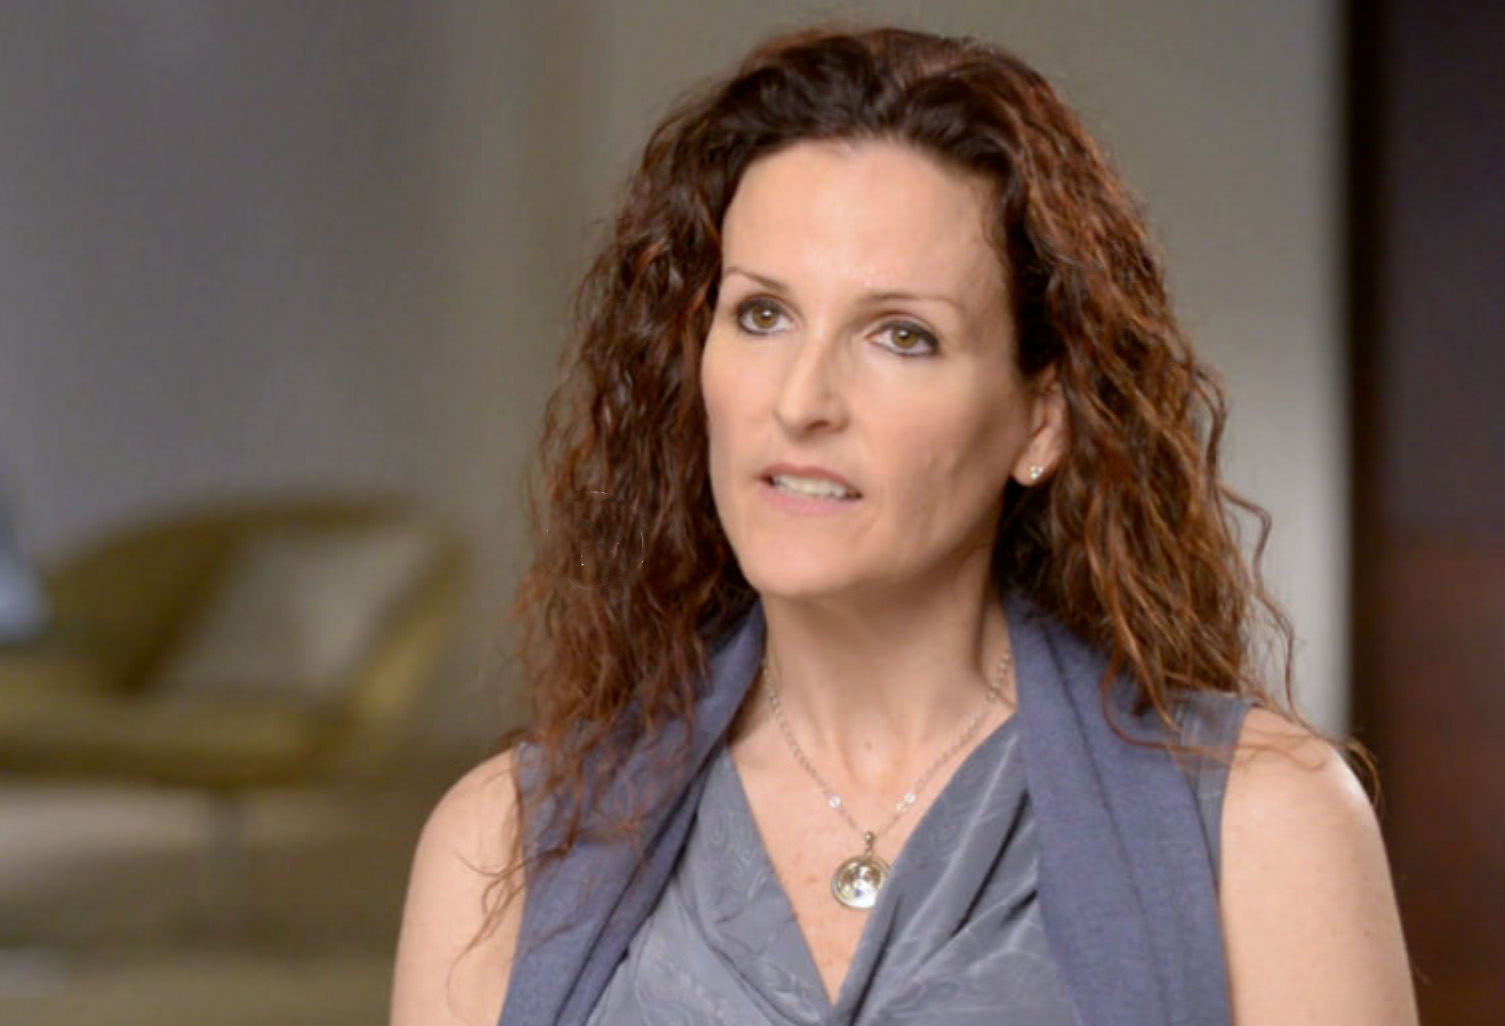 Scientologist and executive manager Alison Osborn on David Miscavige, a pillar of Scientology